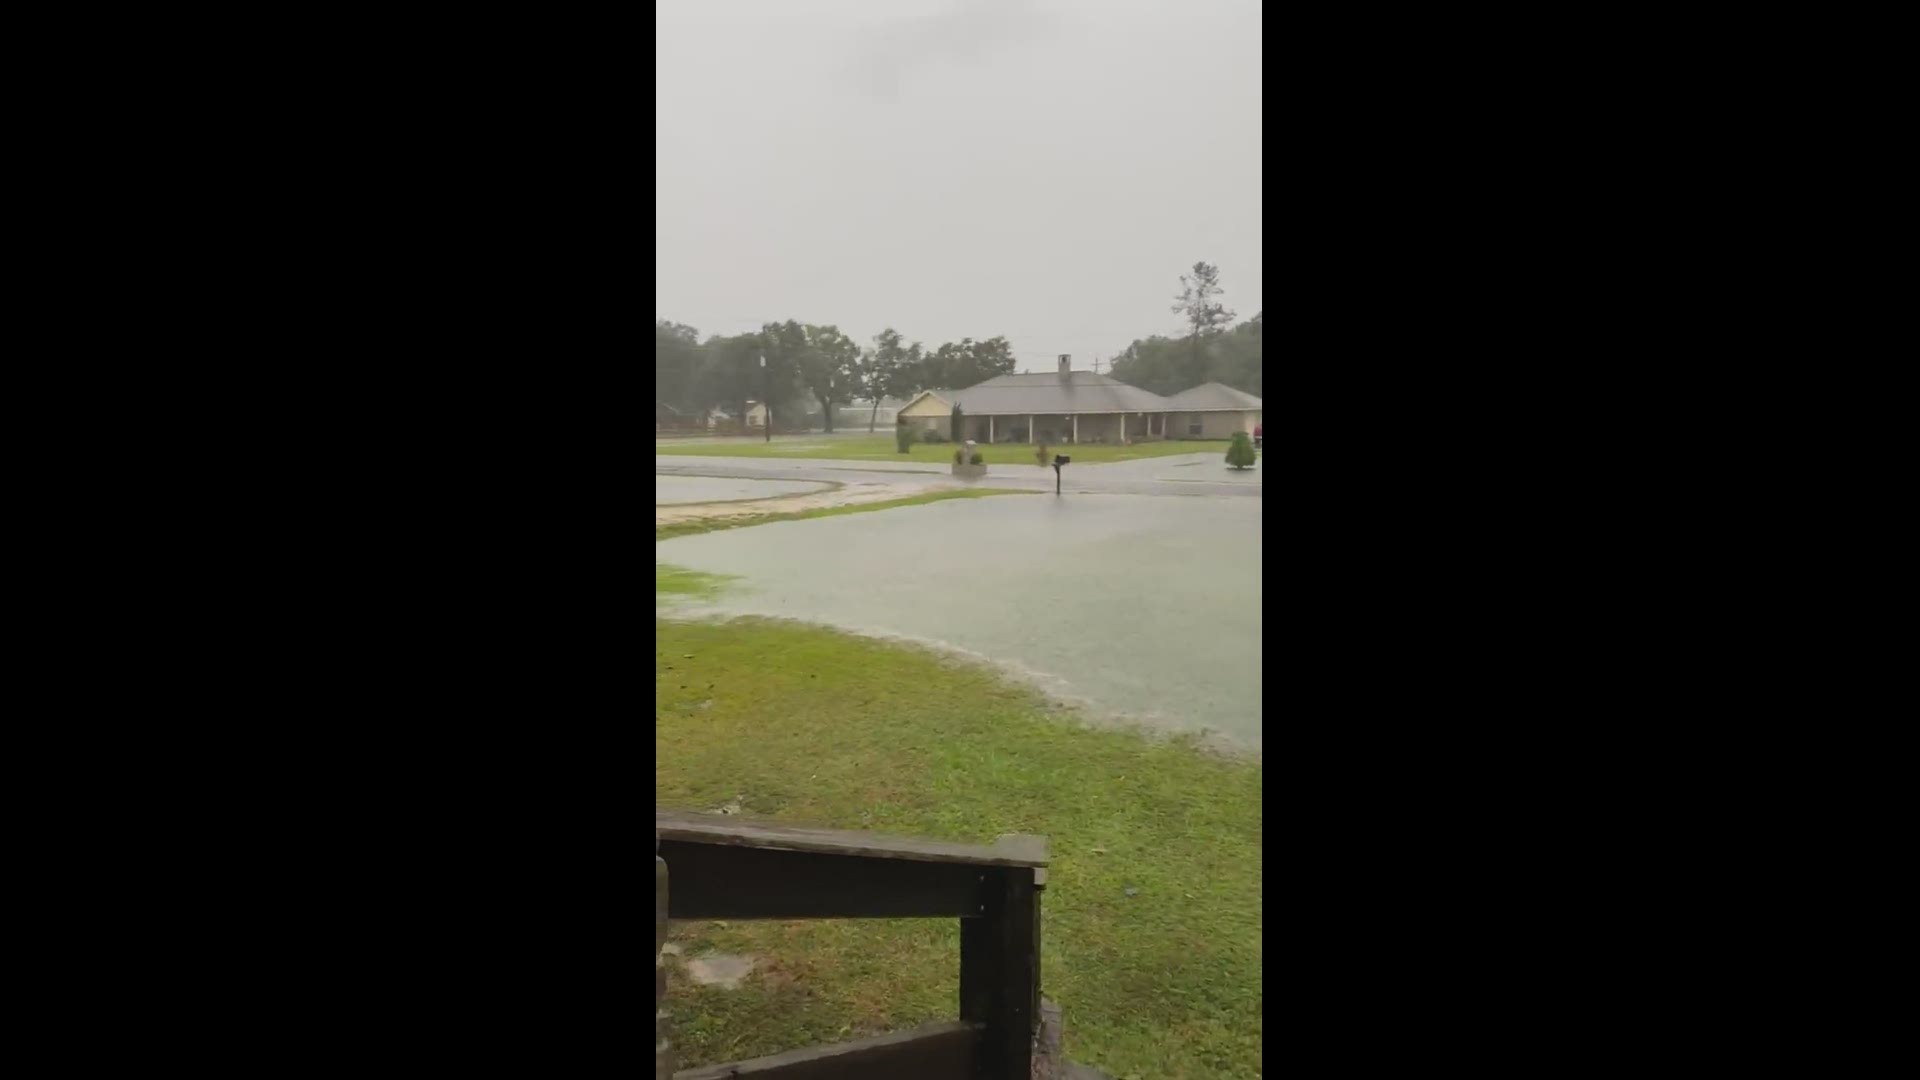 Video shows flooding in Winnie
Credit: Becky Dale